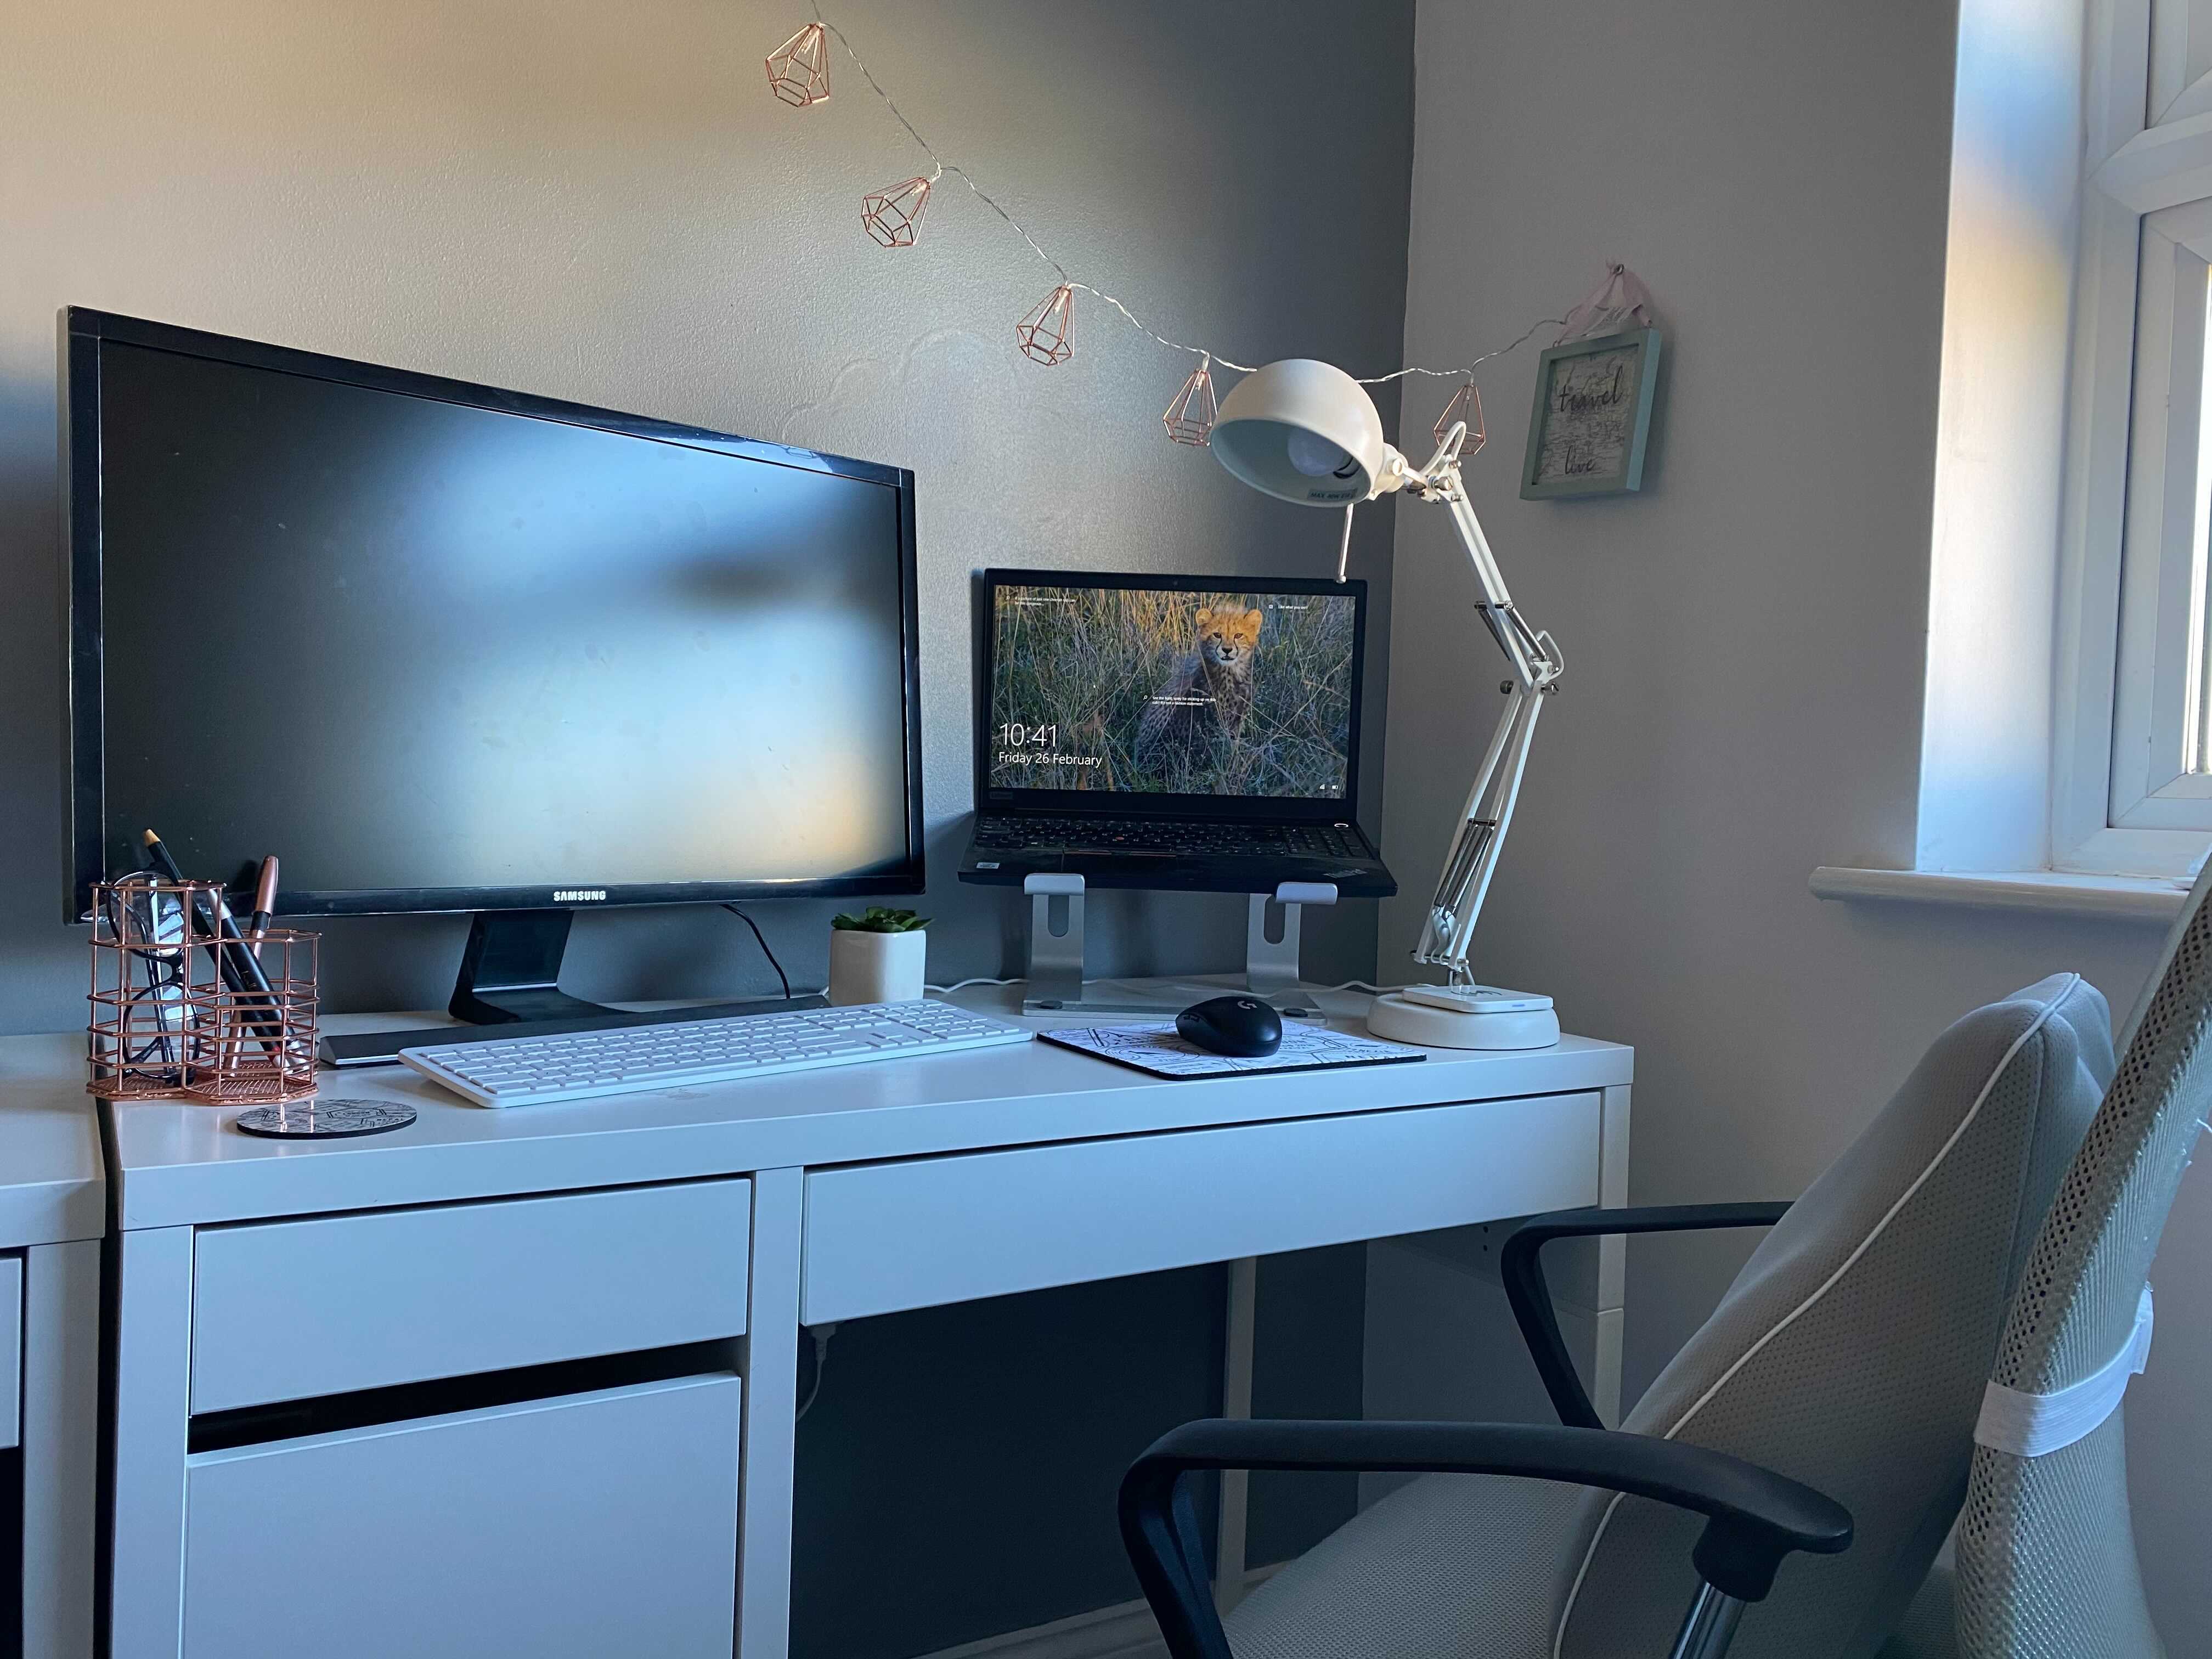 How to Work From Home - Setting Up Your Home Office